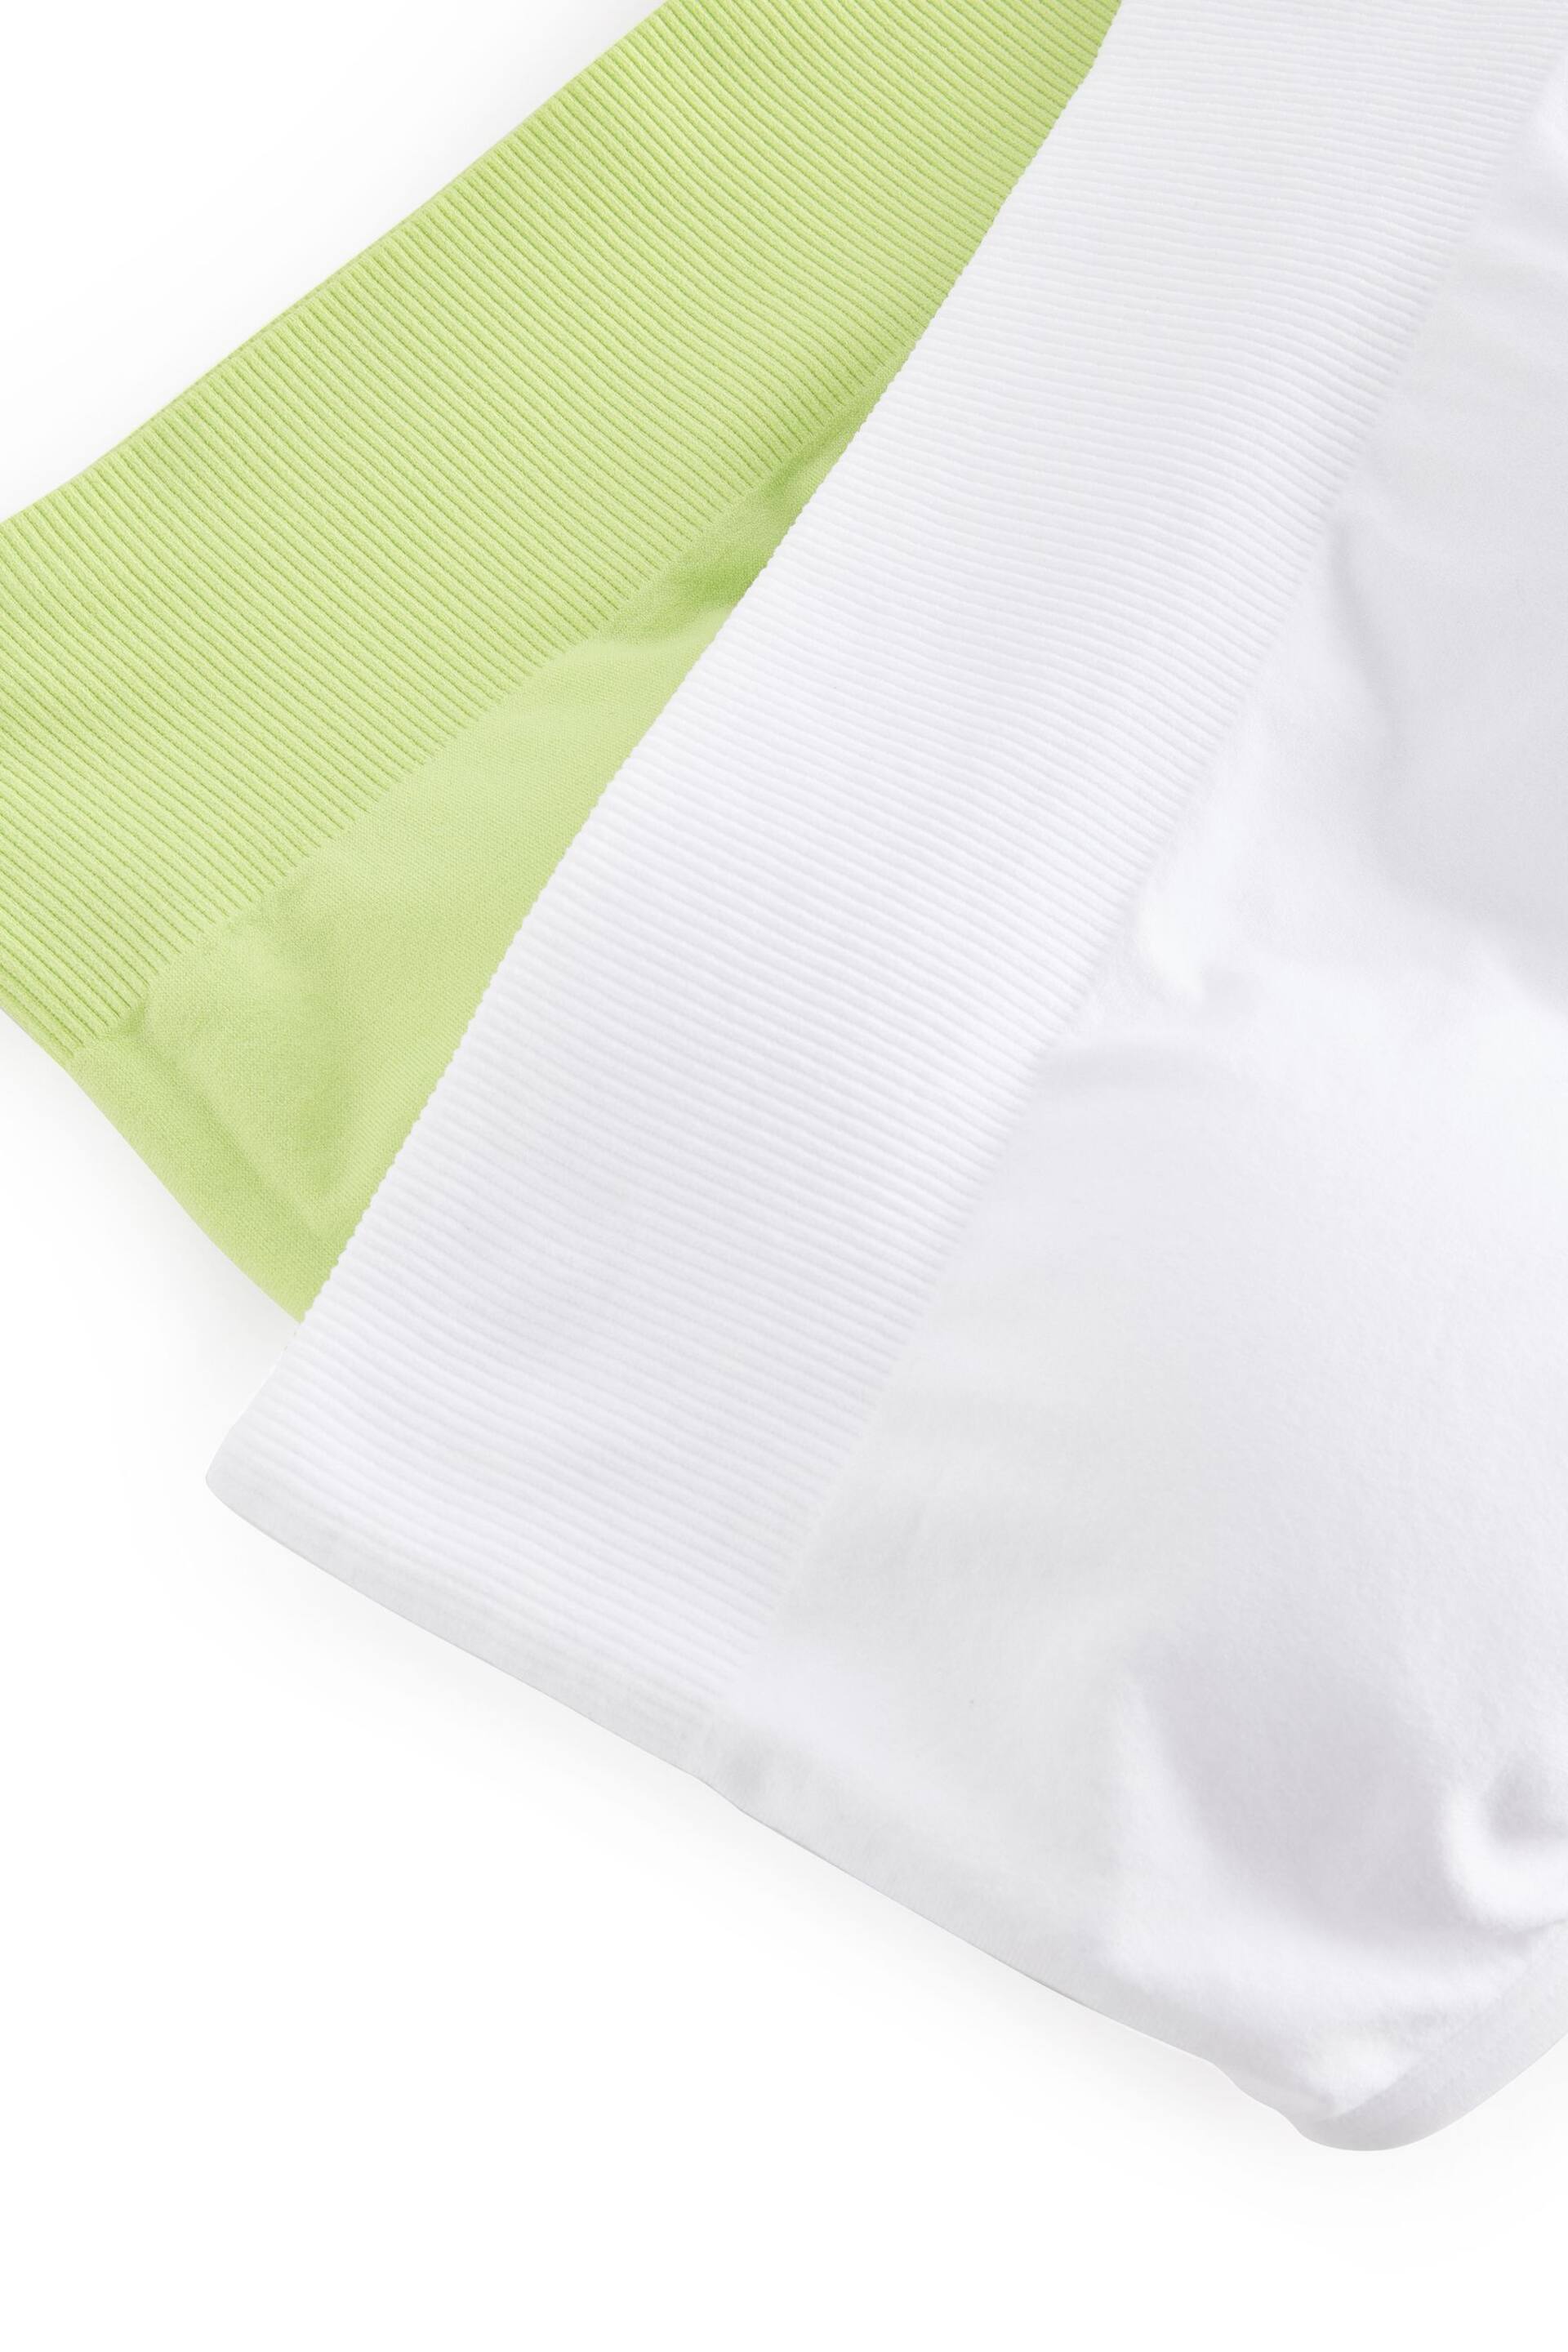 White/Lime Green Seamfree Bandeau Bras 2 Pack - Image 10 of 10